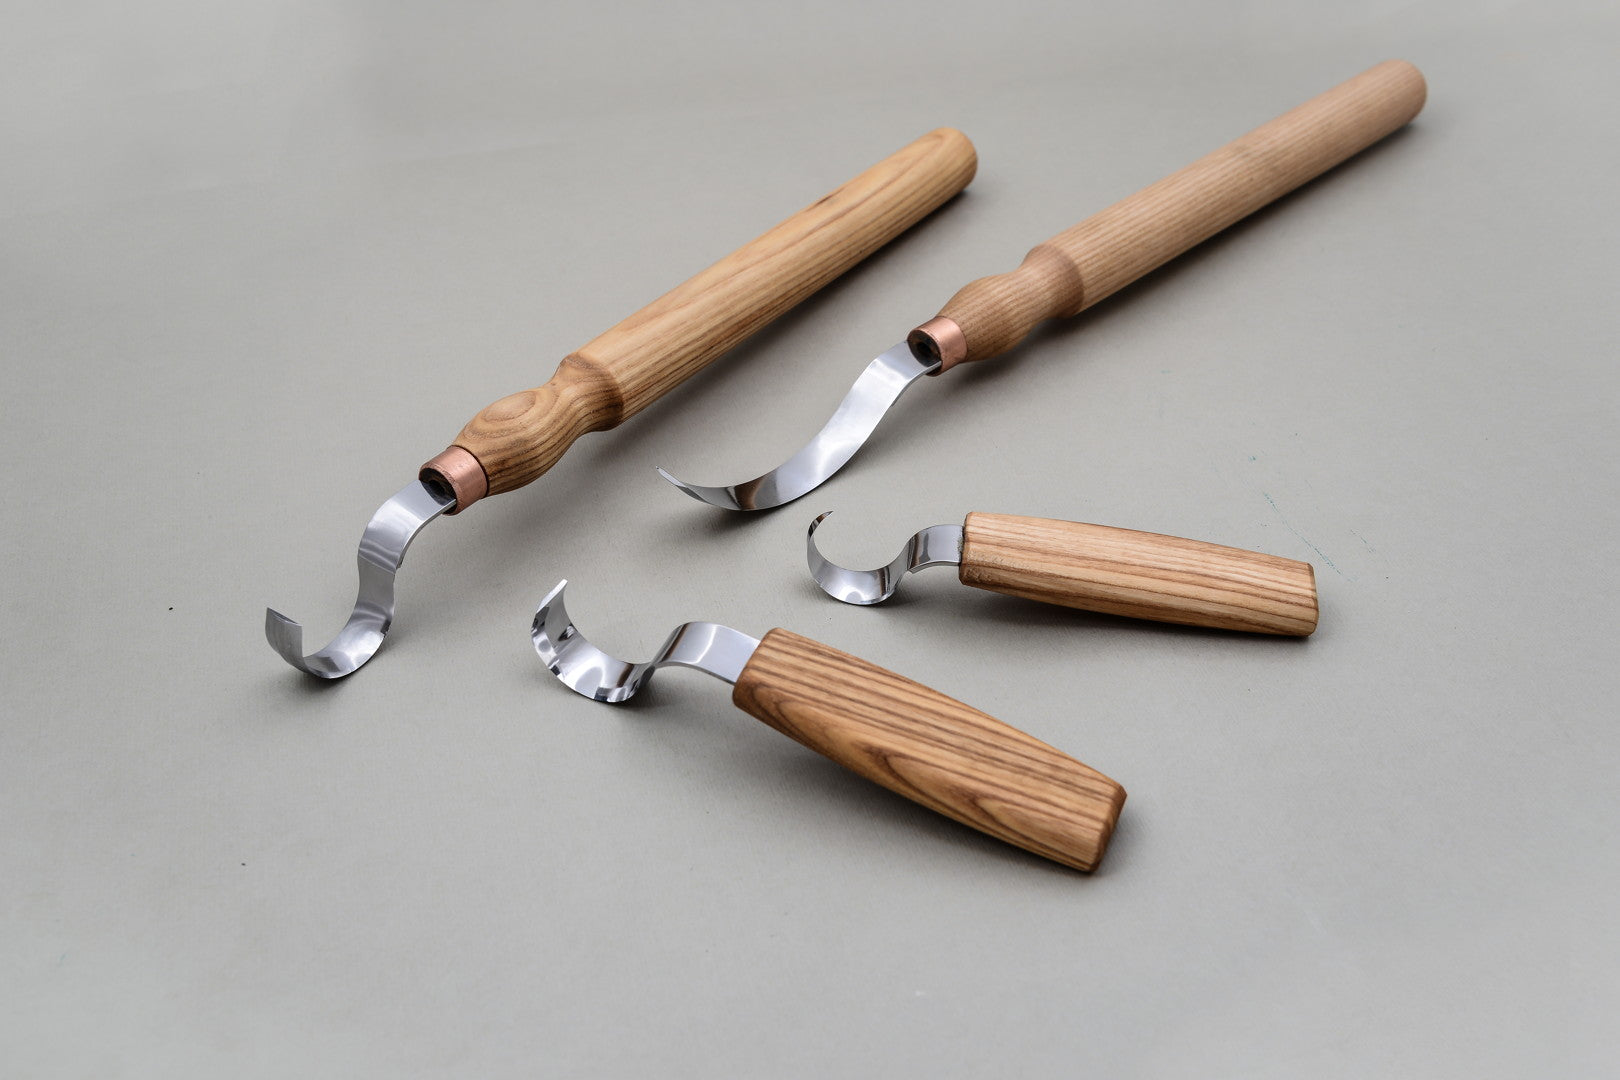 Wood Carving Tools 7 In 1 Wood Carving Knife Kit With Carving Hook